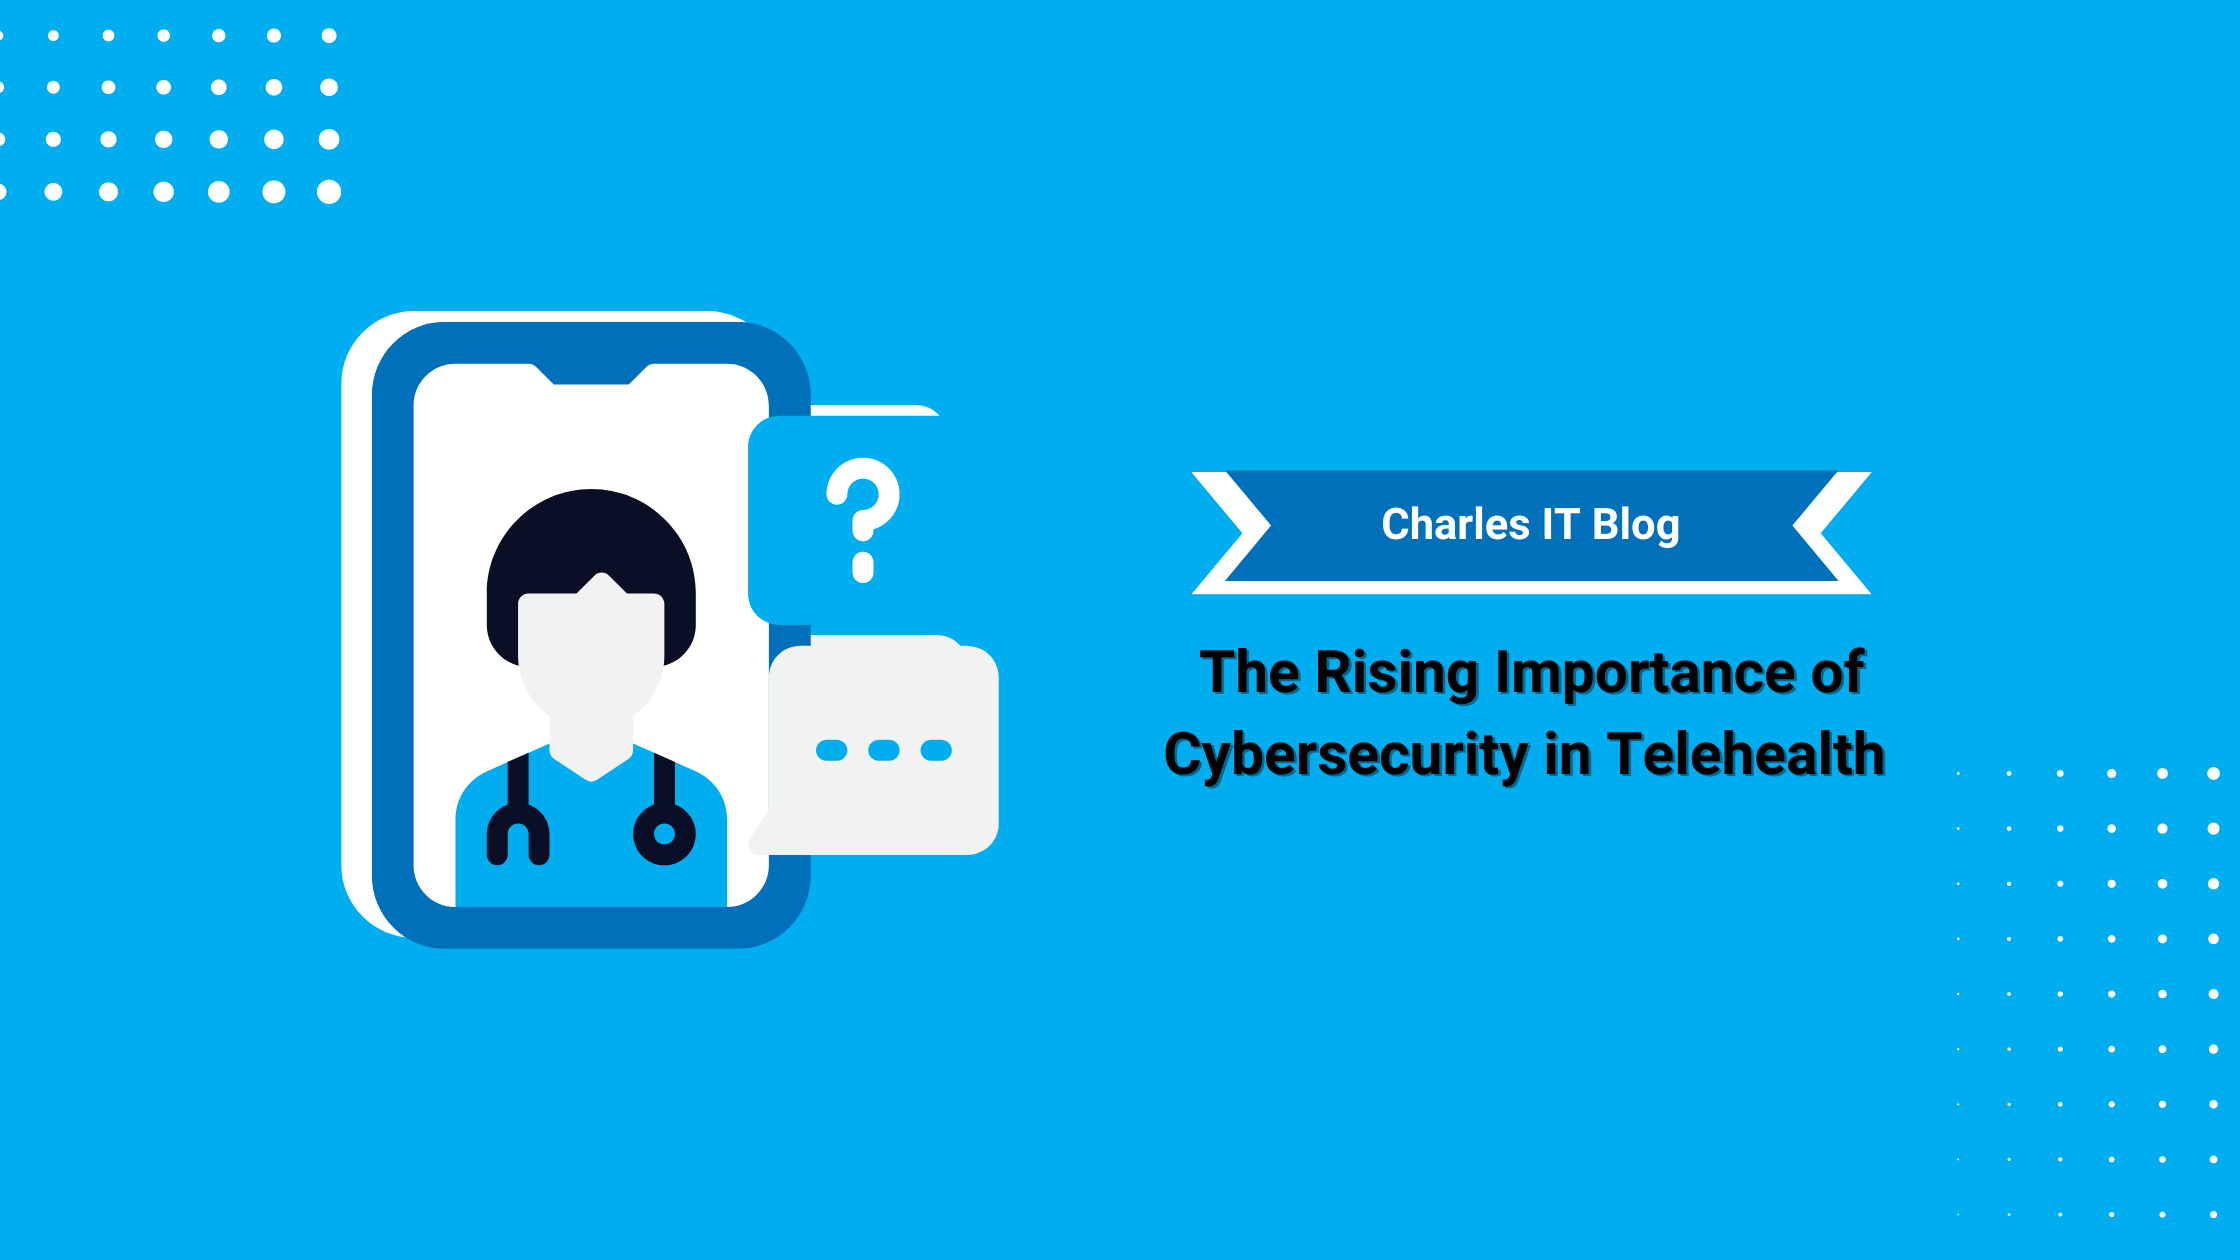 The Rising Importance of Cybersecurity in Telehealth